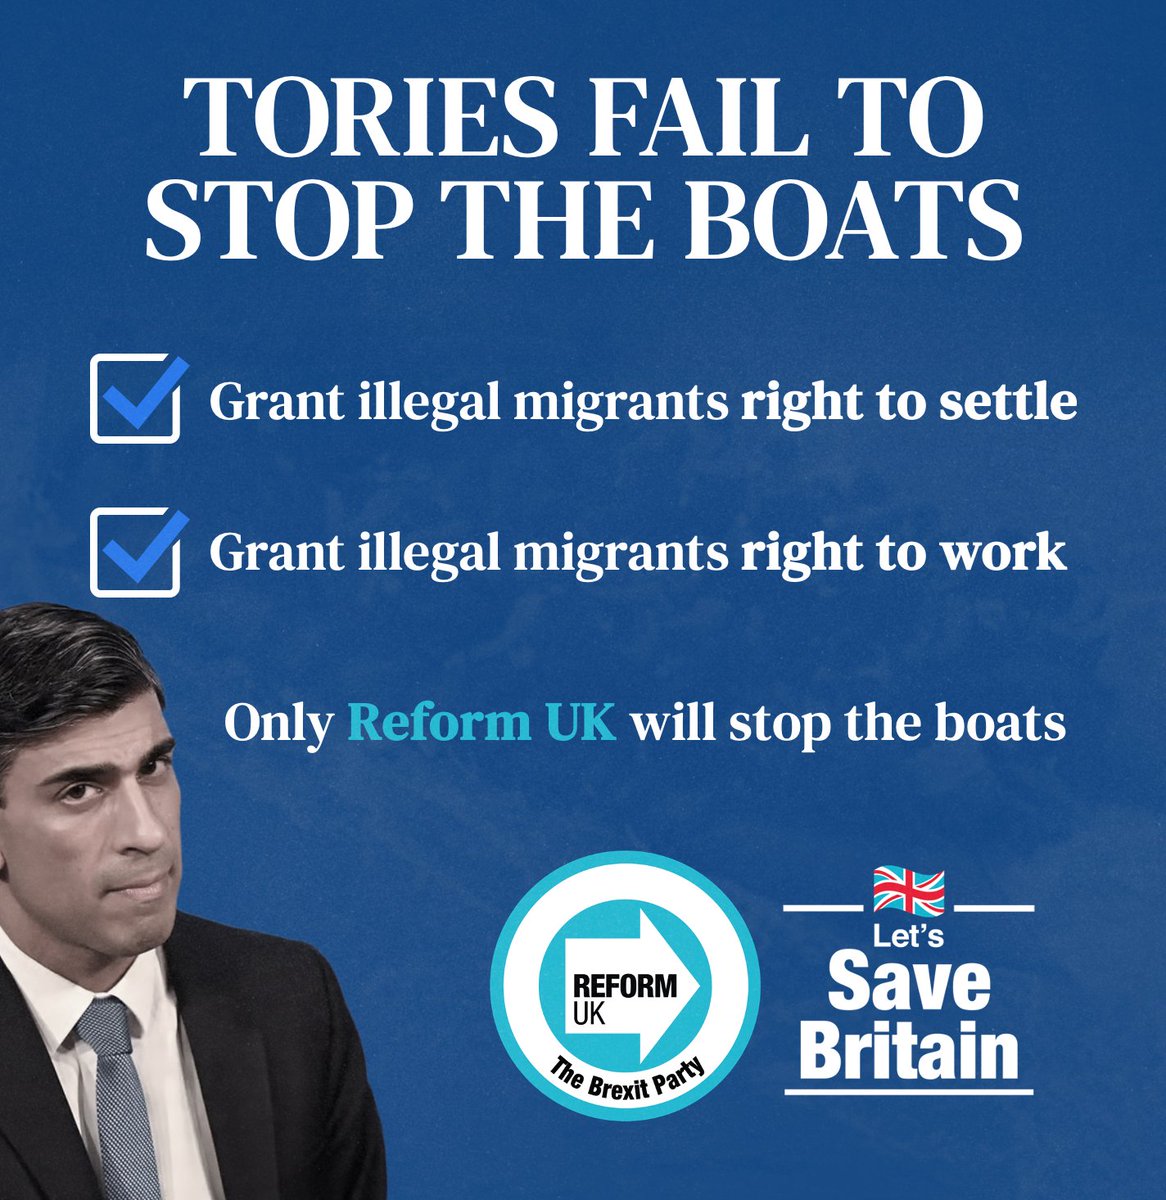 The Tories have completely failed to stop the boats. Labour wants more EU and more mass migration. Only Reform UK will stop the boats and freeze non-essential immigration.